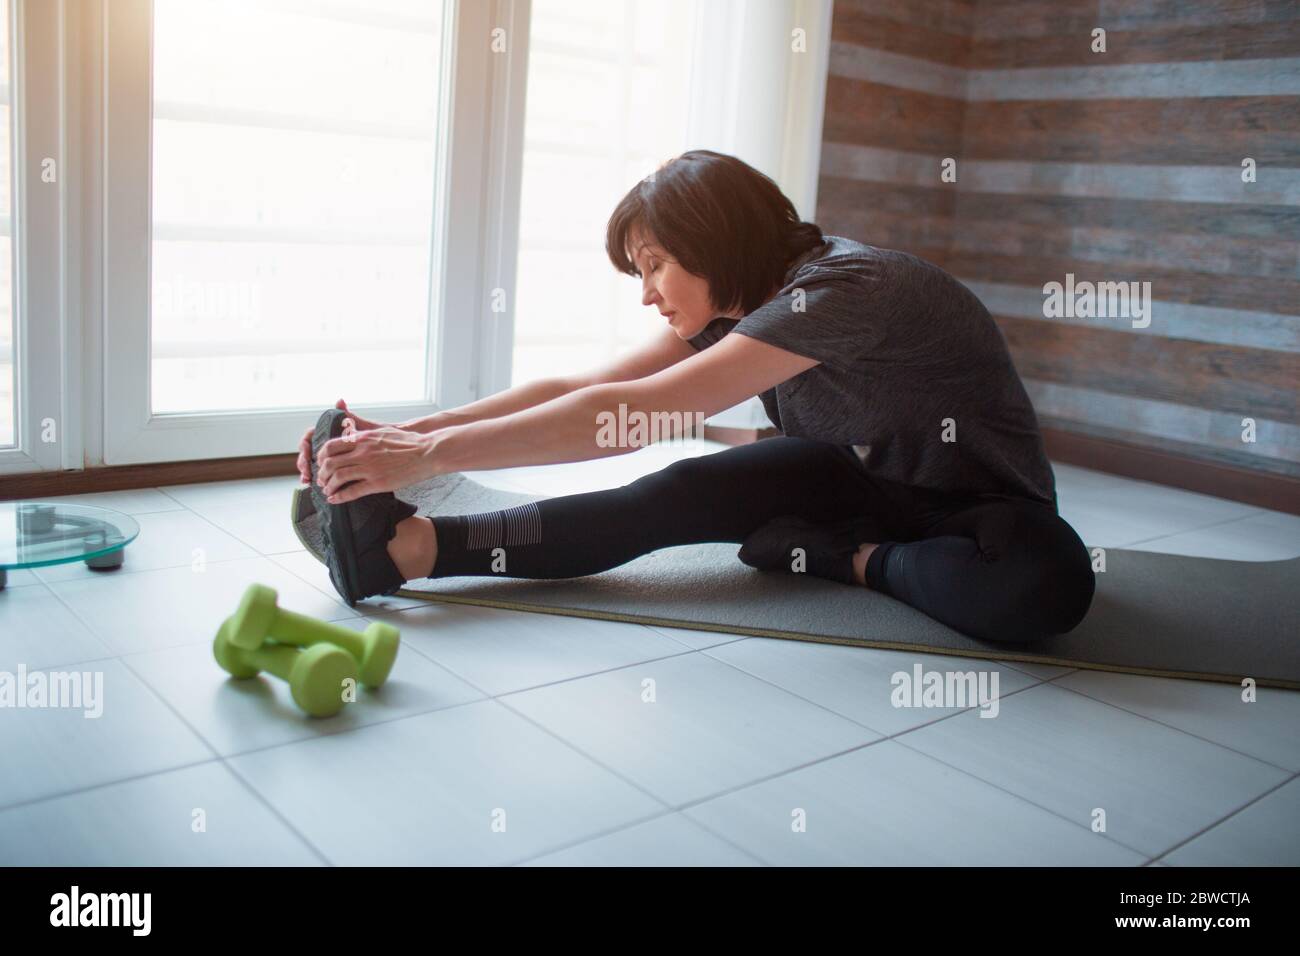 Adult fit slim woman has workout at home. Senior model sit with crossed legs and meditating or praying. Stretching hands holding together. Take care Stock Photo